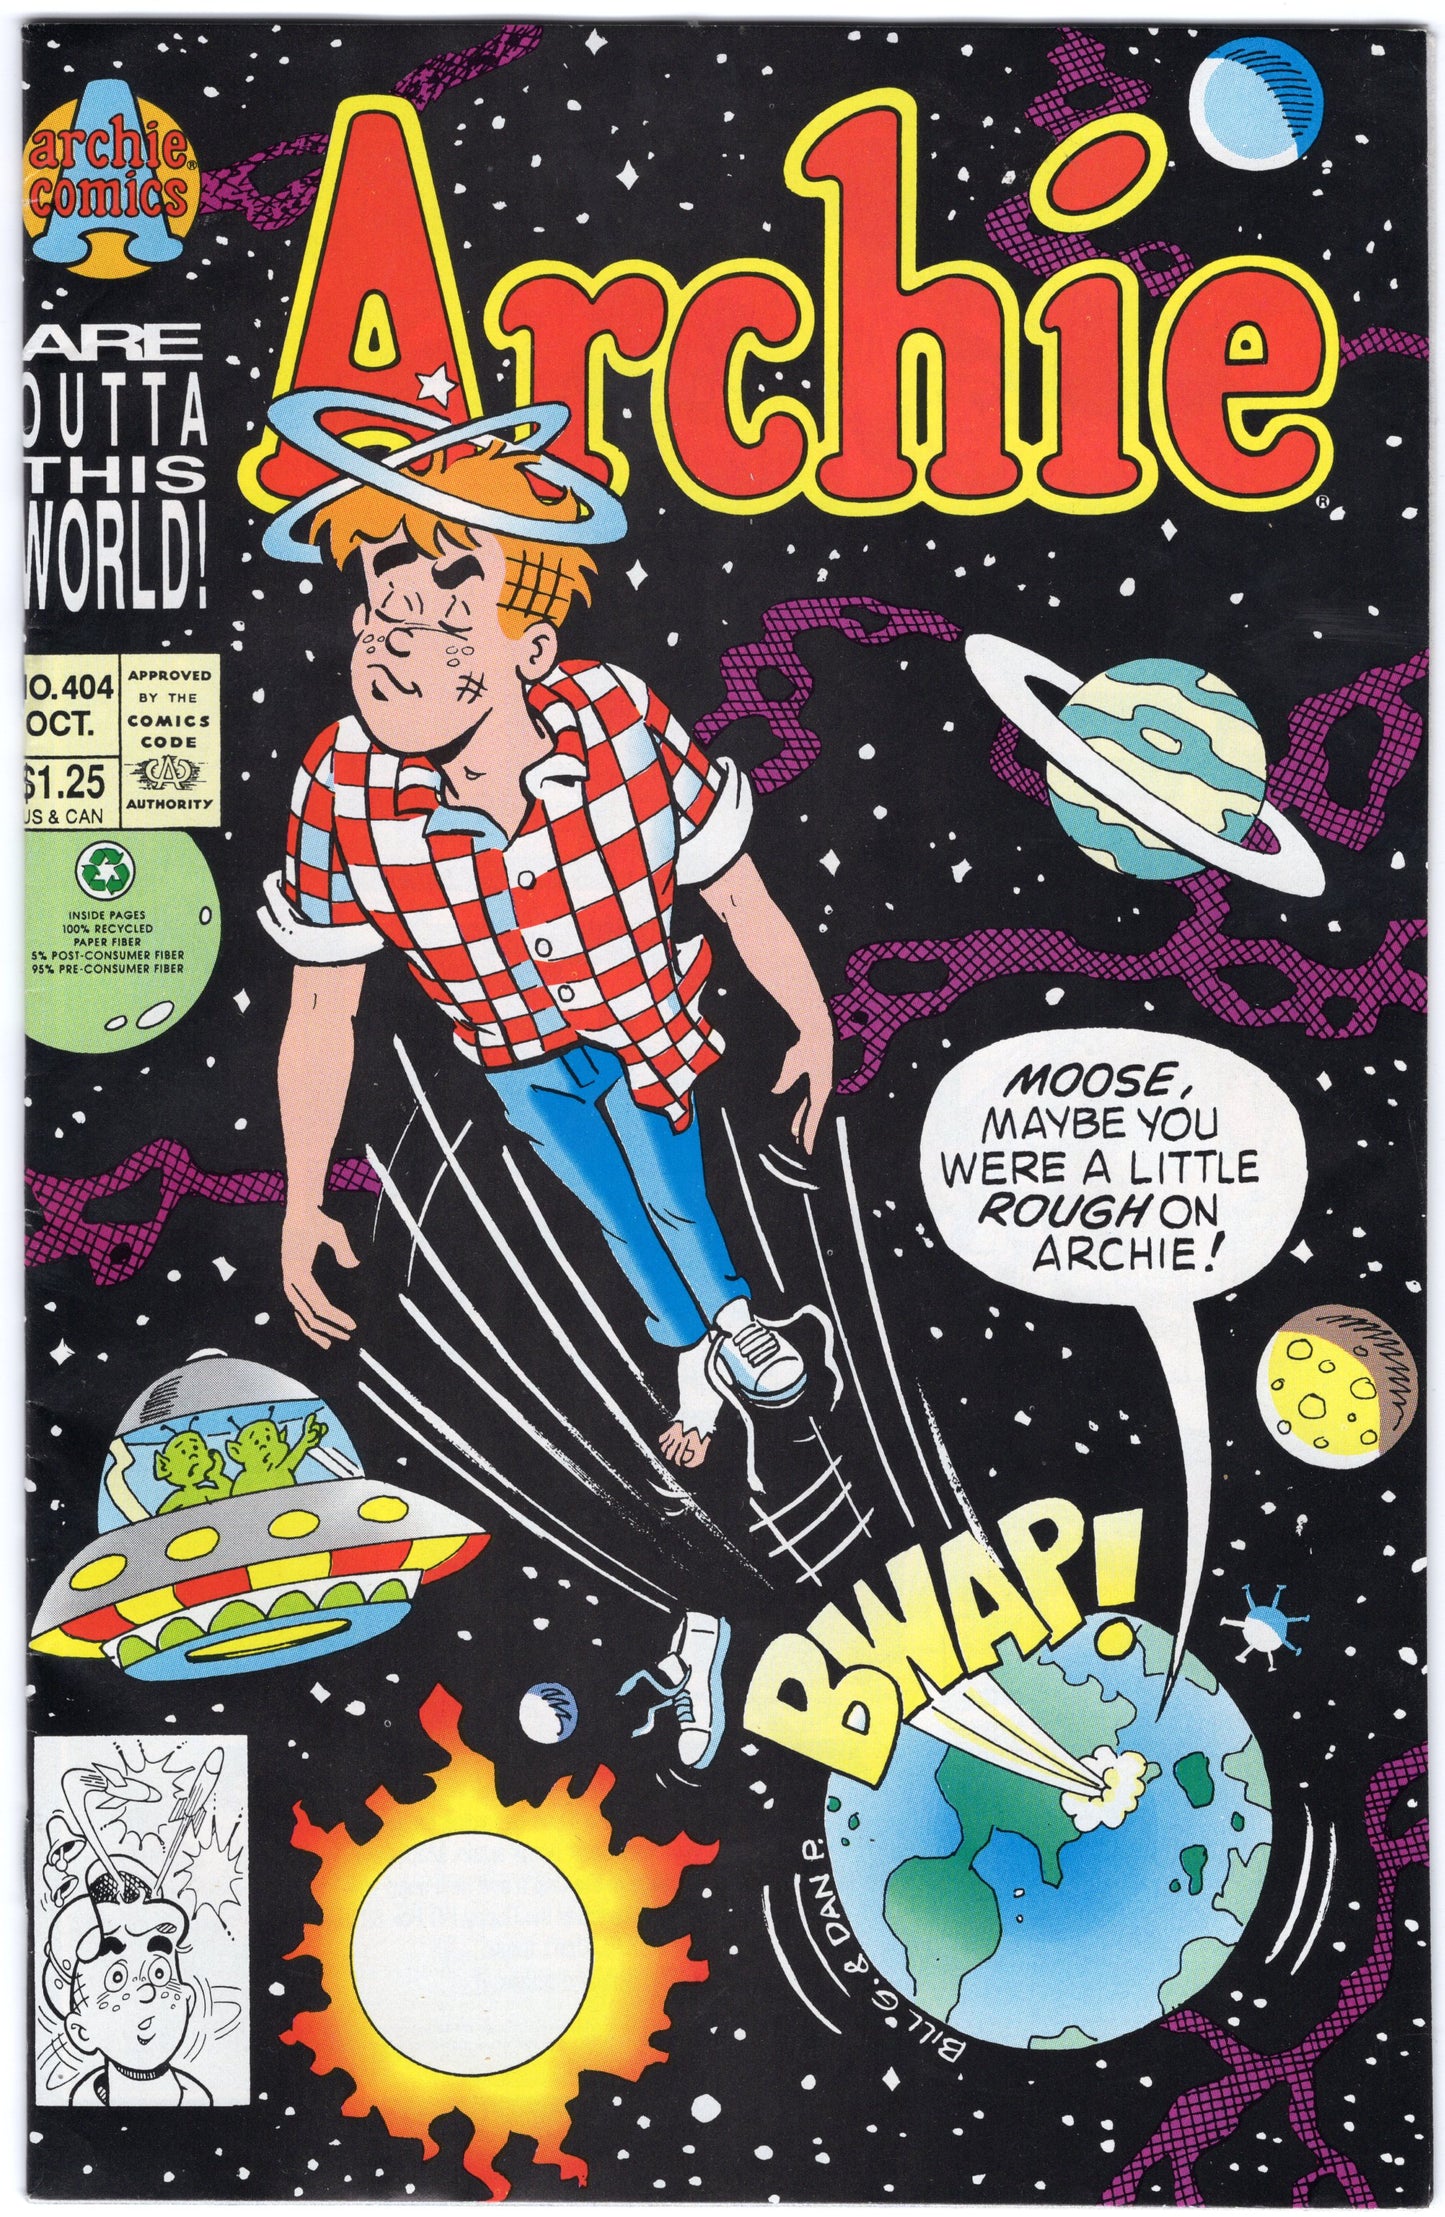 Archie - Issue #404 (Oct. 1992 - Archie Comics / Publications) FN+